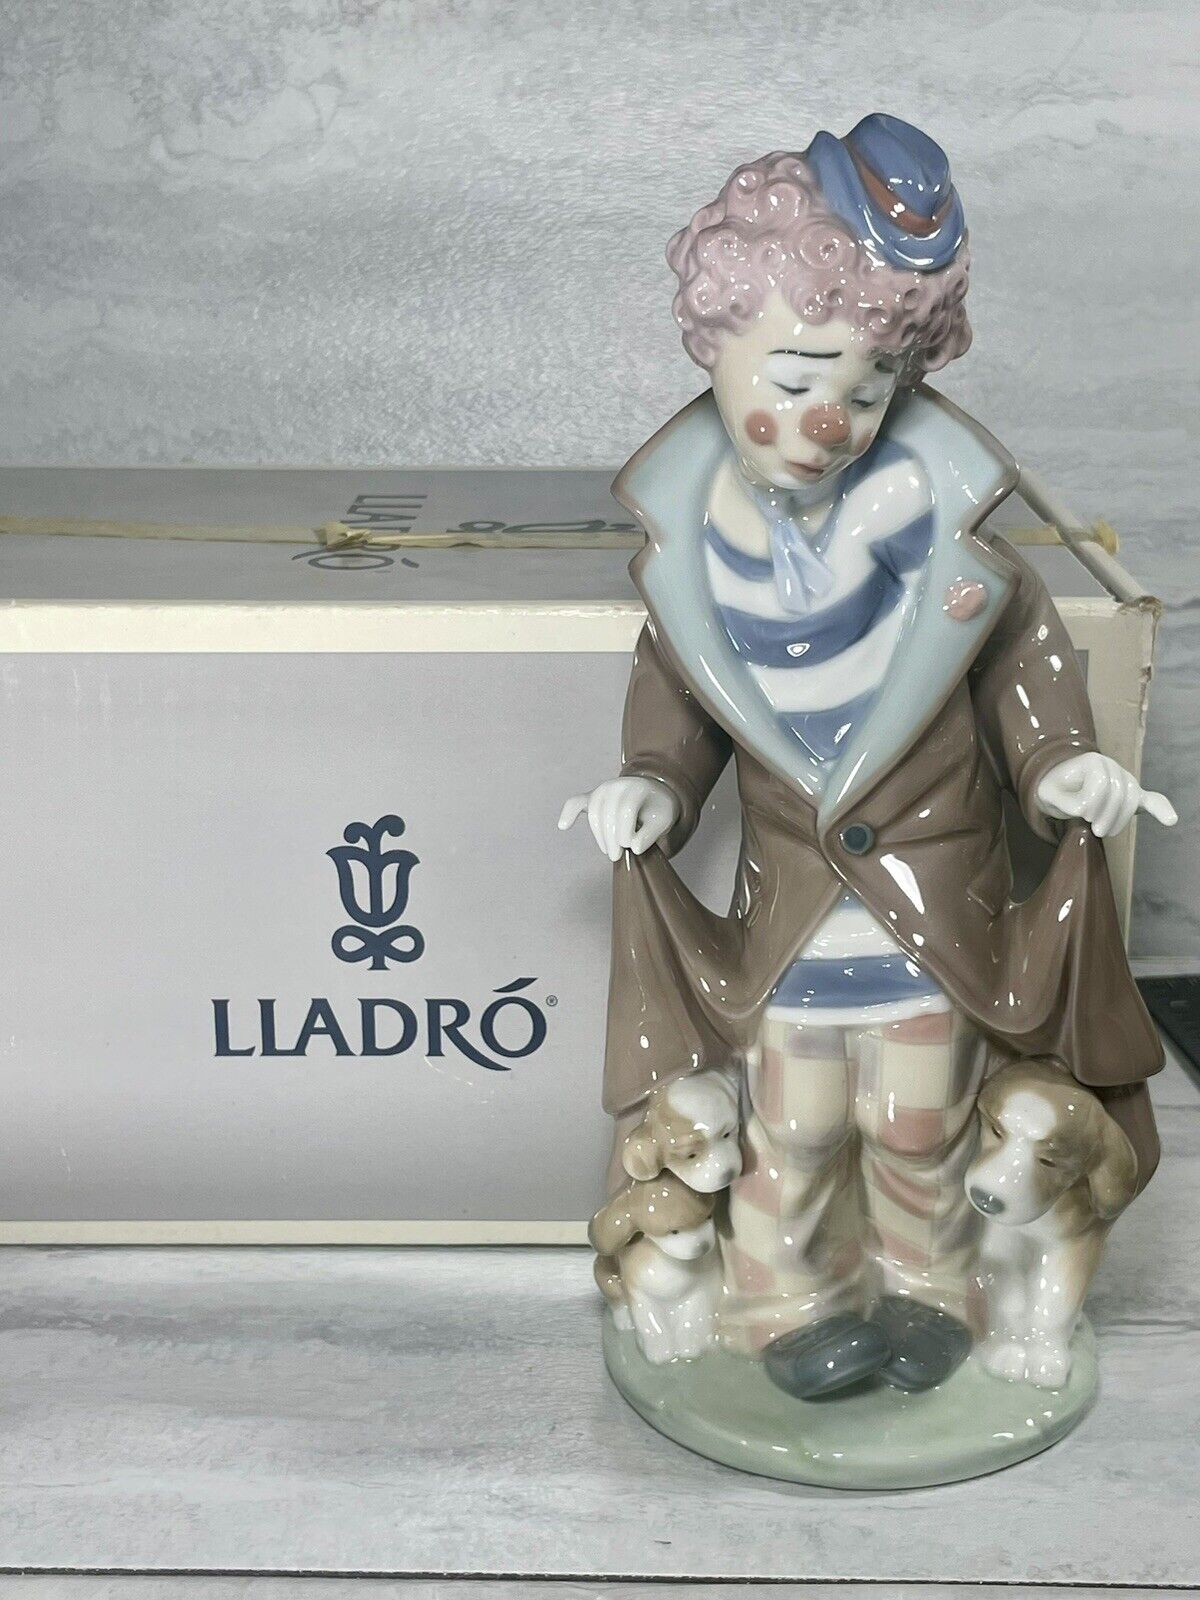 LLADRO “Surprise” CLOWN With Puppies Figurine # 5901 MINT COND, RARE AND RETIRED